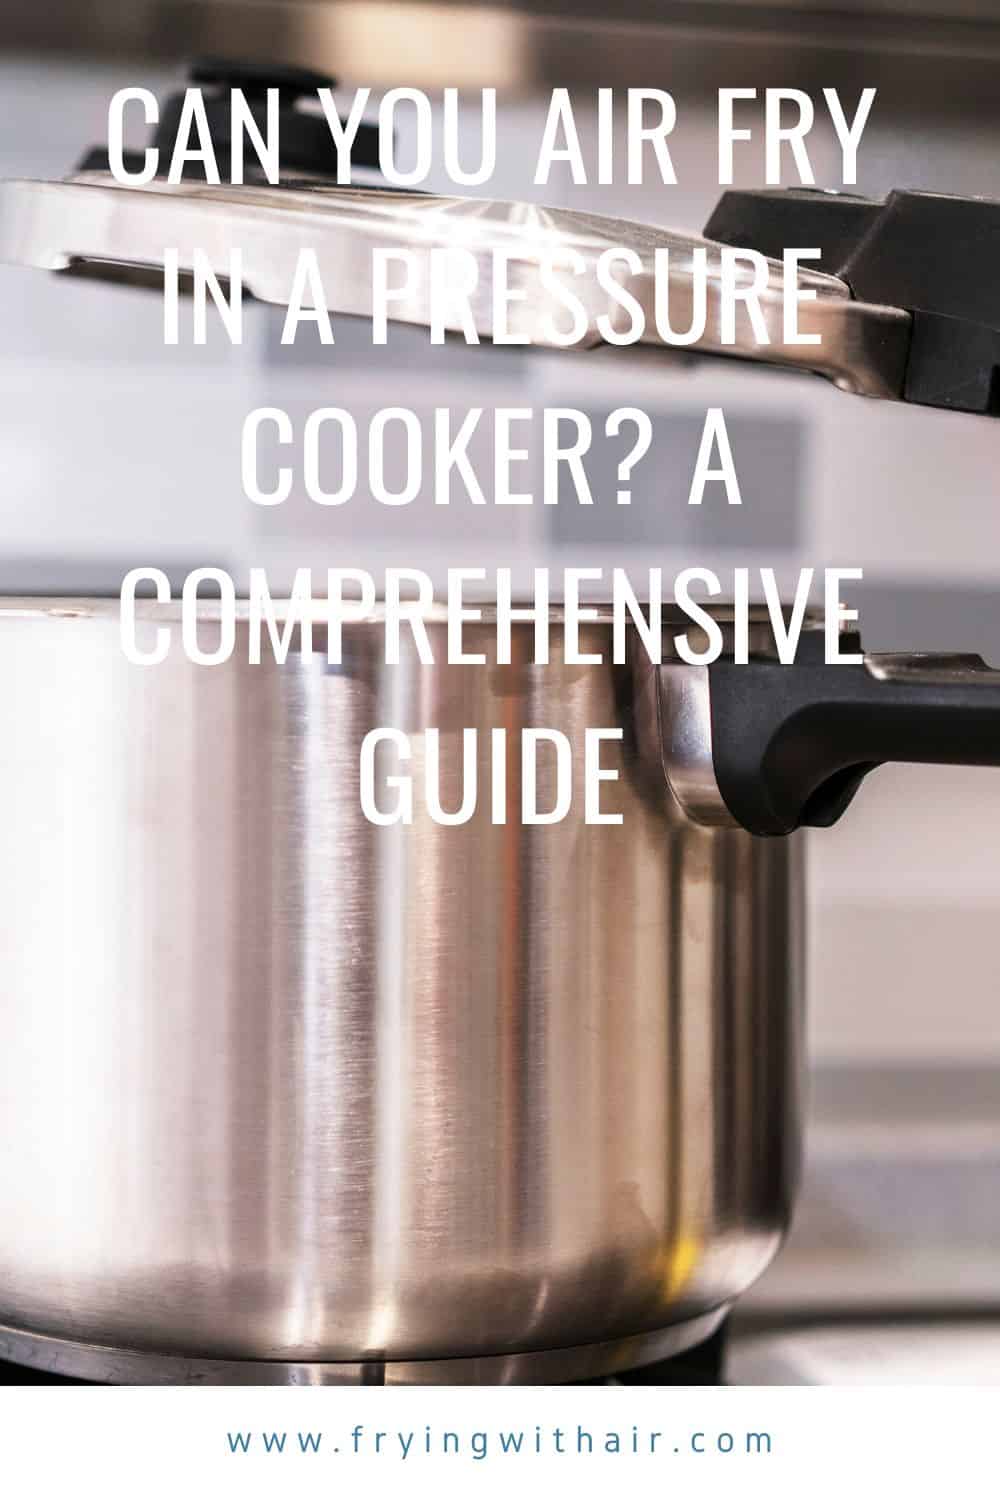 Can You Air Fry in a Pressure Cooker (1)